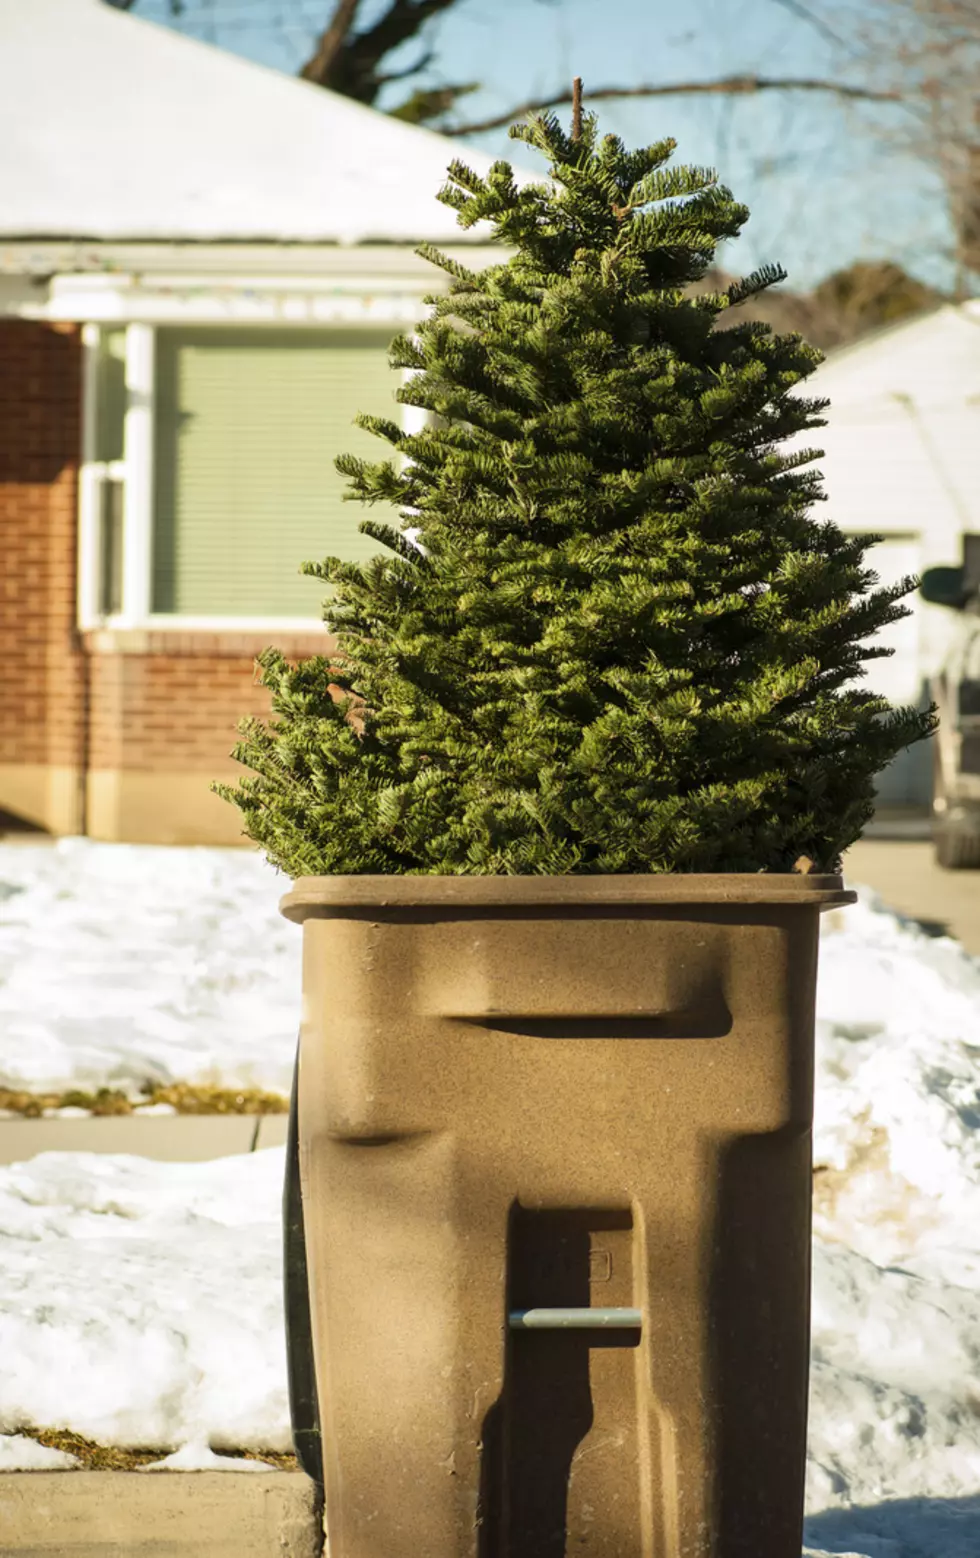 Find Tri-Cities Locations for Proper Christmas Tree Disposal Here